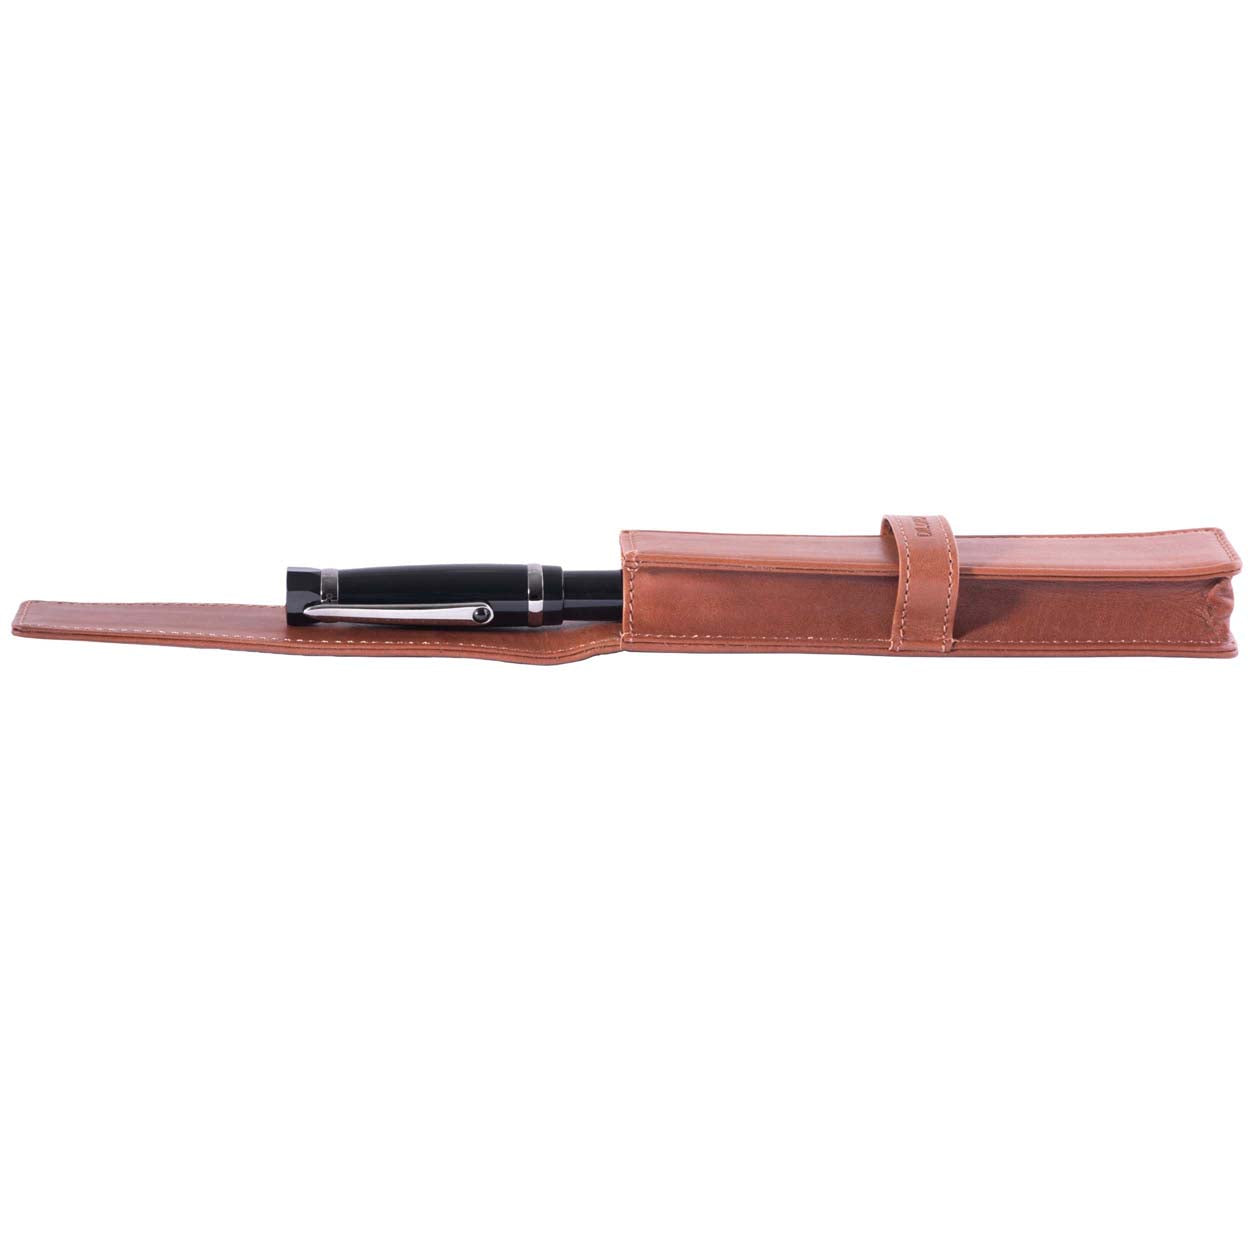 DiLoro Single Leather Pen Pencil Holder One Pen Bugatti Tan - Side View with Pen (not included)